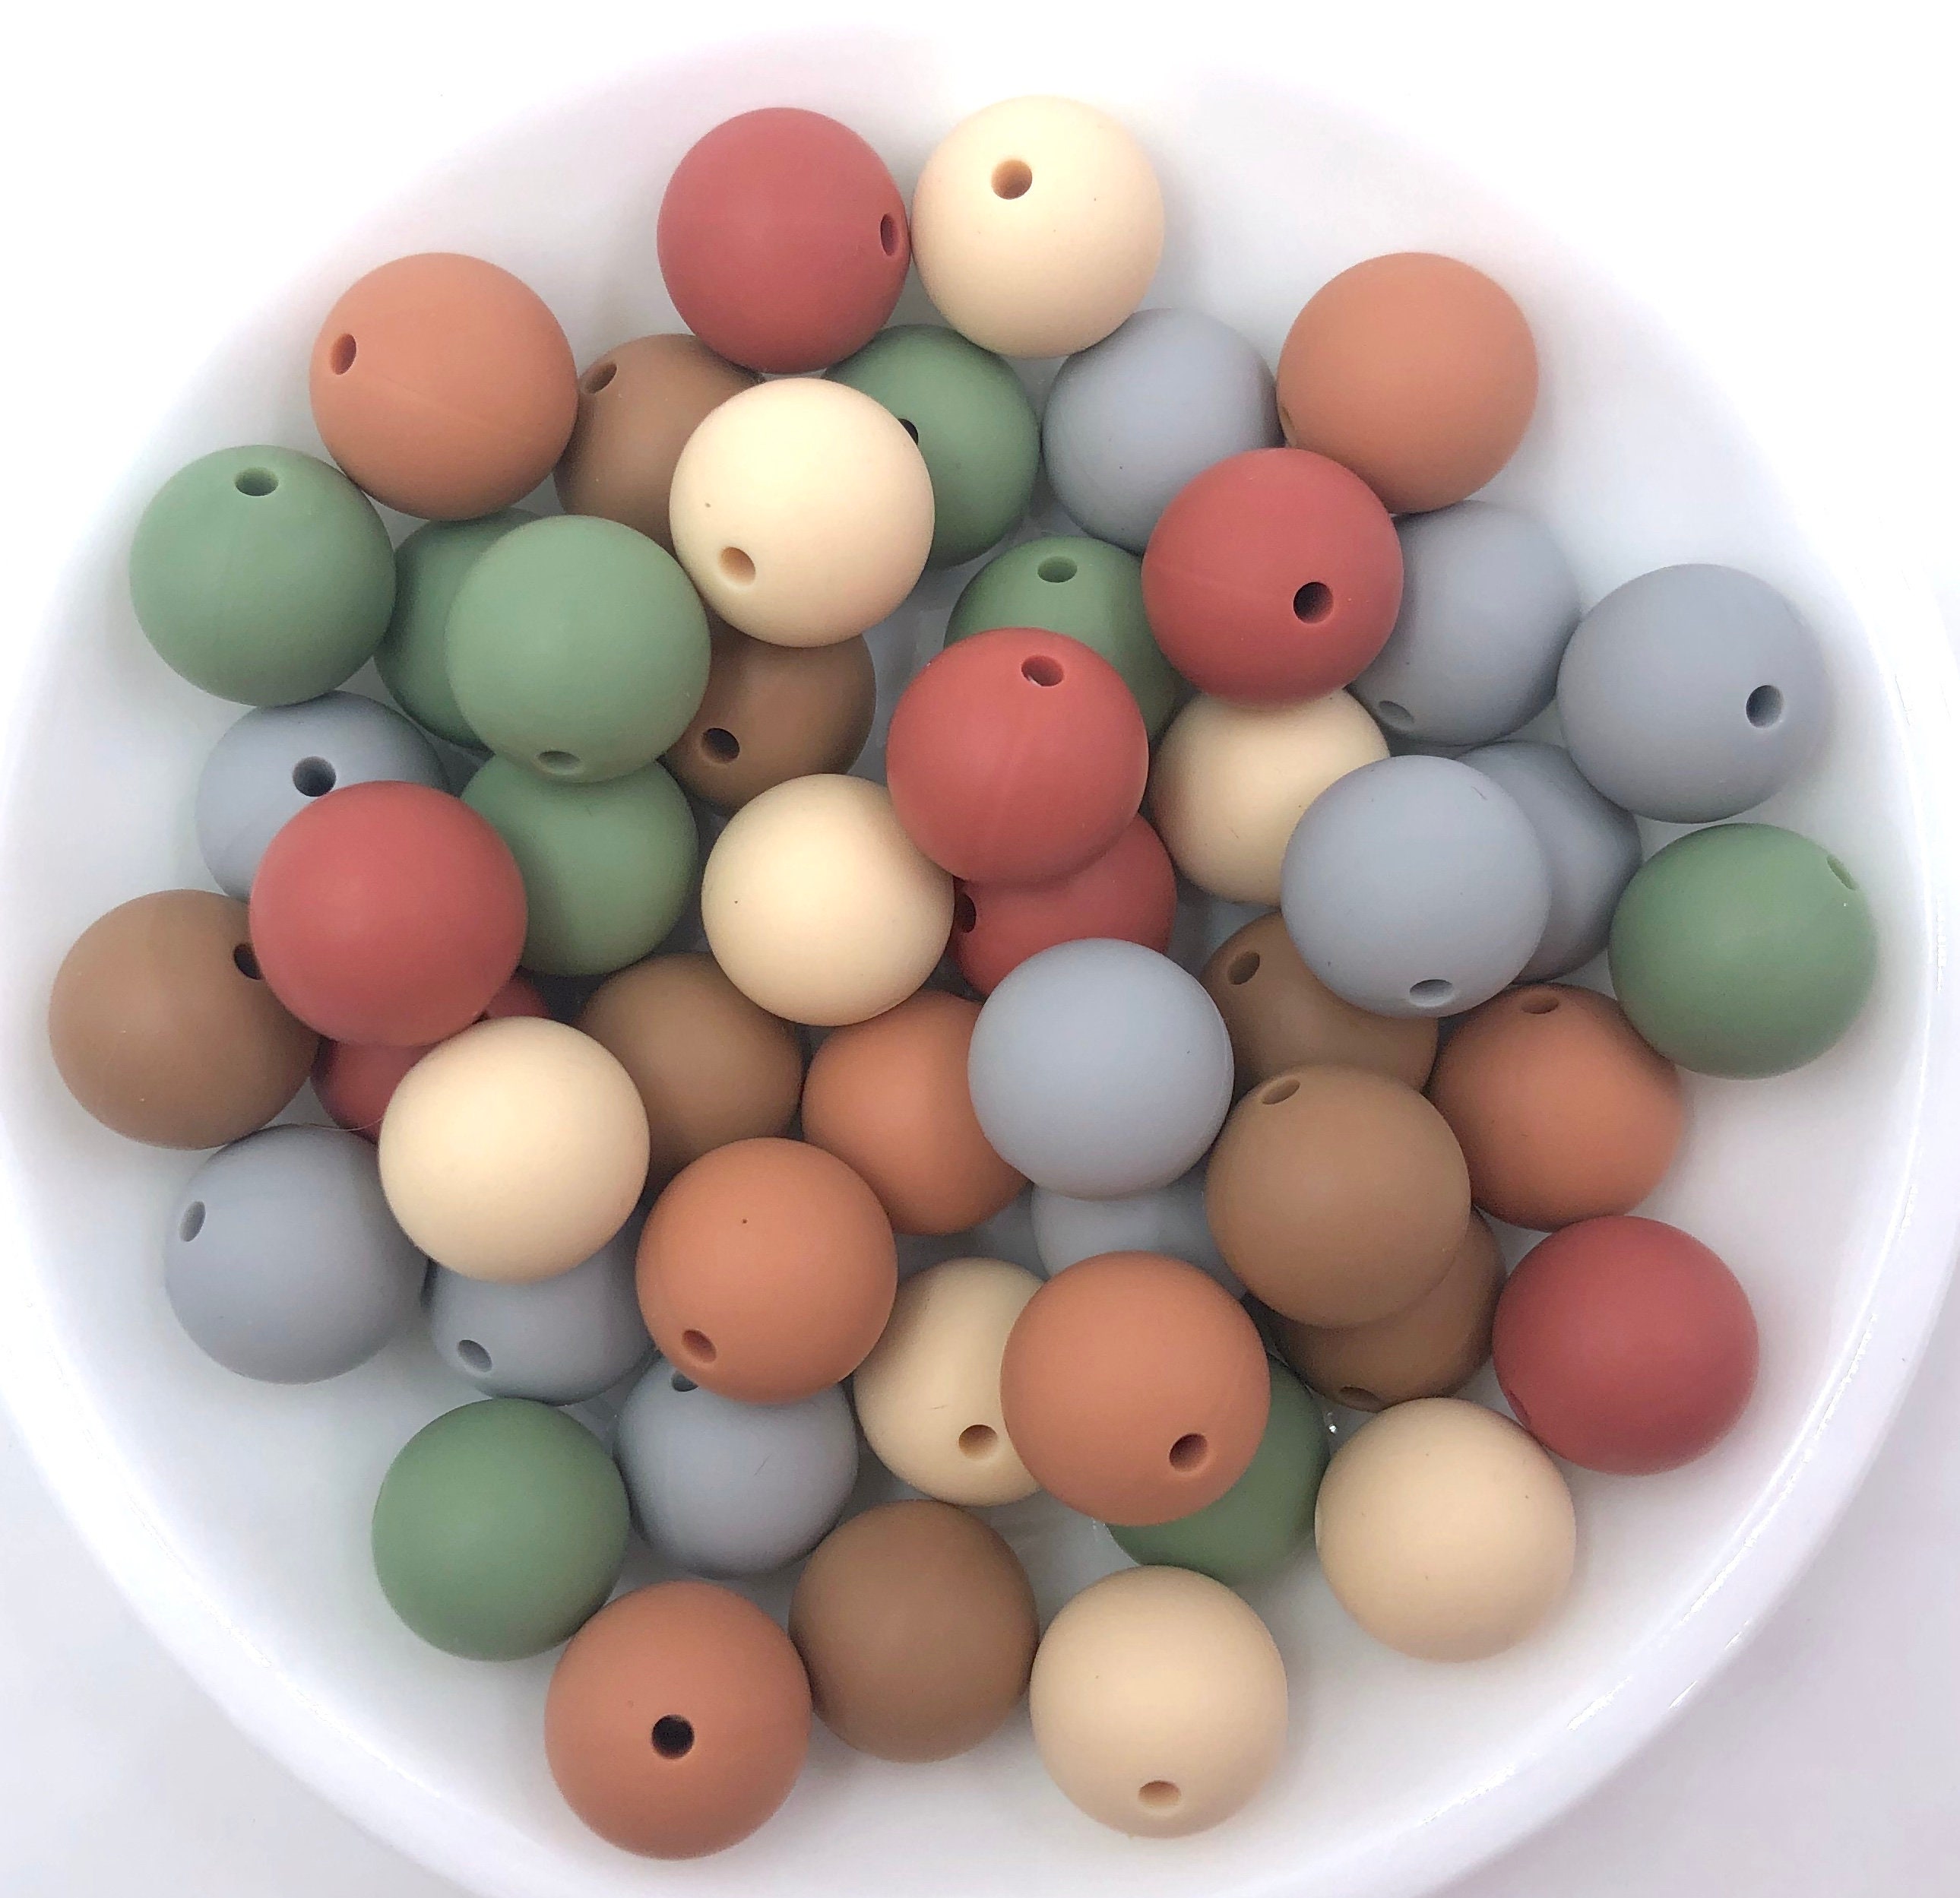 Boho Silicone Bead Mix, Wholesale Silicone Beads, Silicone Beads, Beige,  Light Gray, Maroon, Green Tea, Latte, Coral Spice 